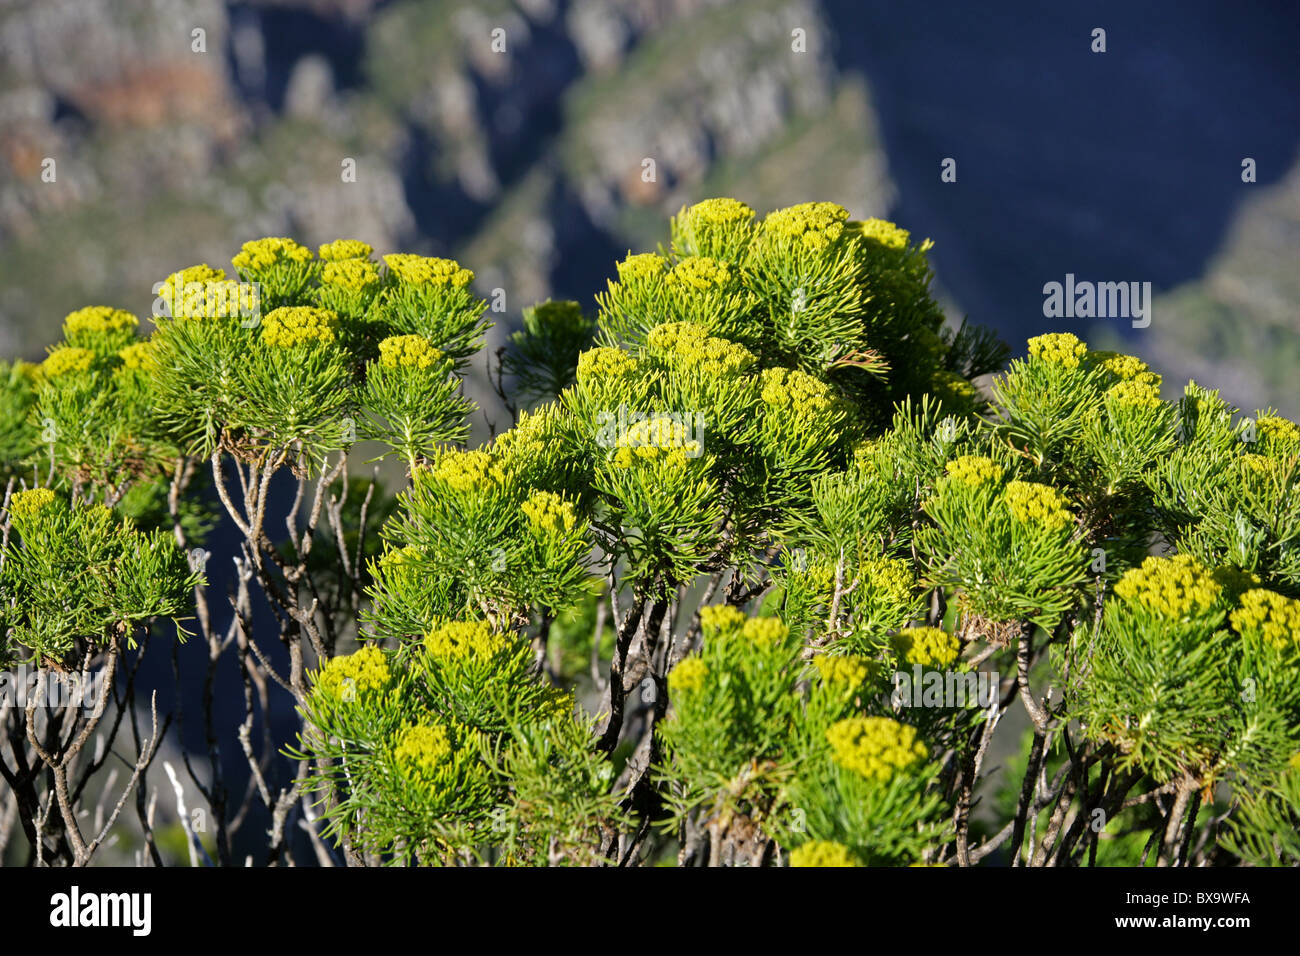 Golden Coulter Bush, Hymenolepis parviflora (syn. Athanasia parviflora), Asteraceae. Table Mountain, South Africa. Stock Photo